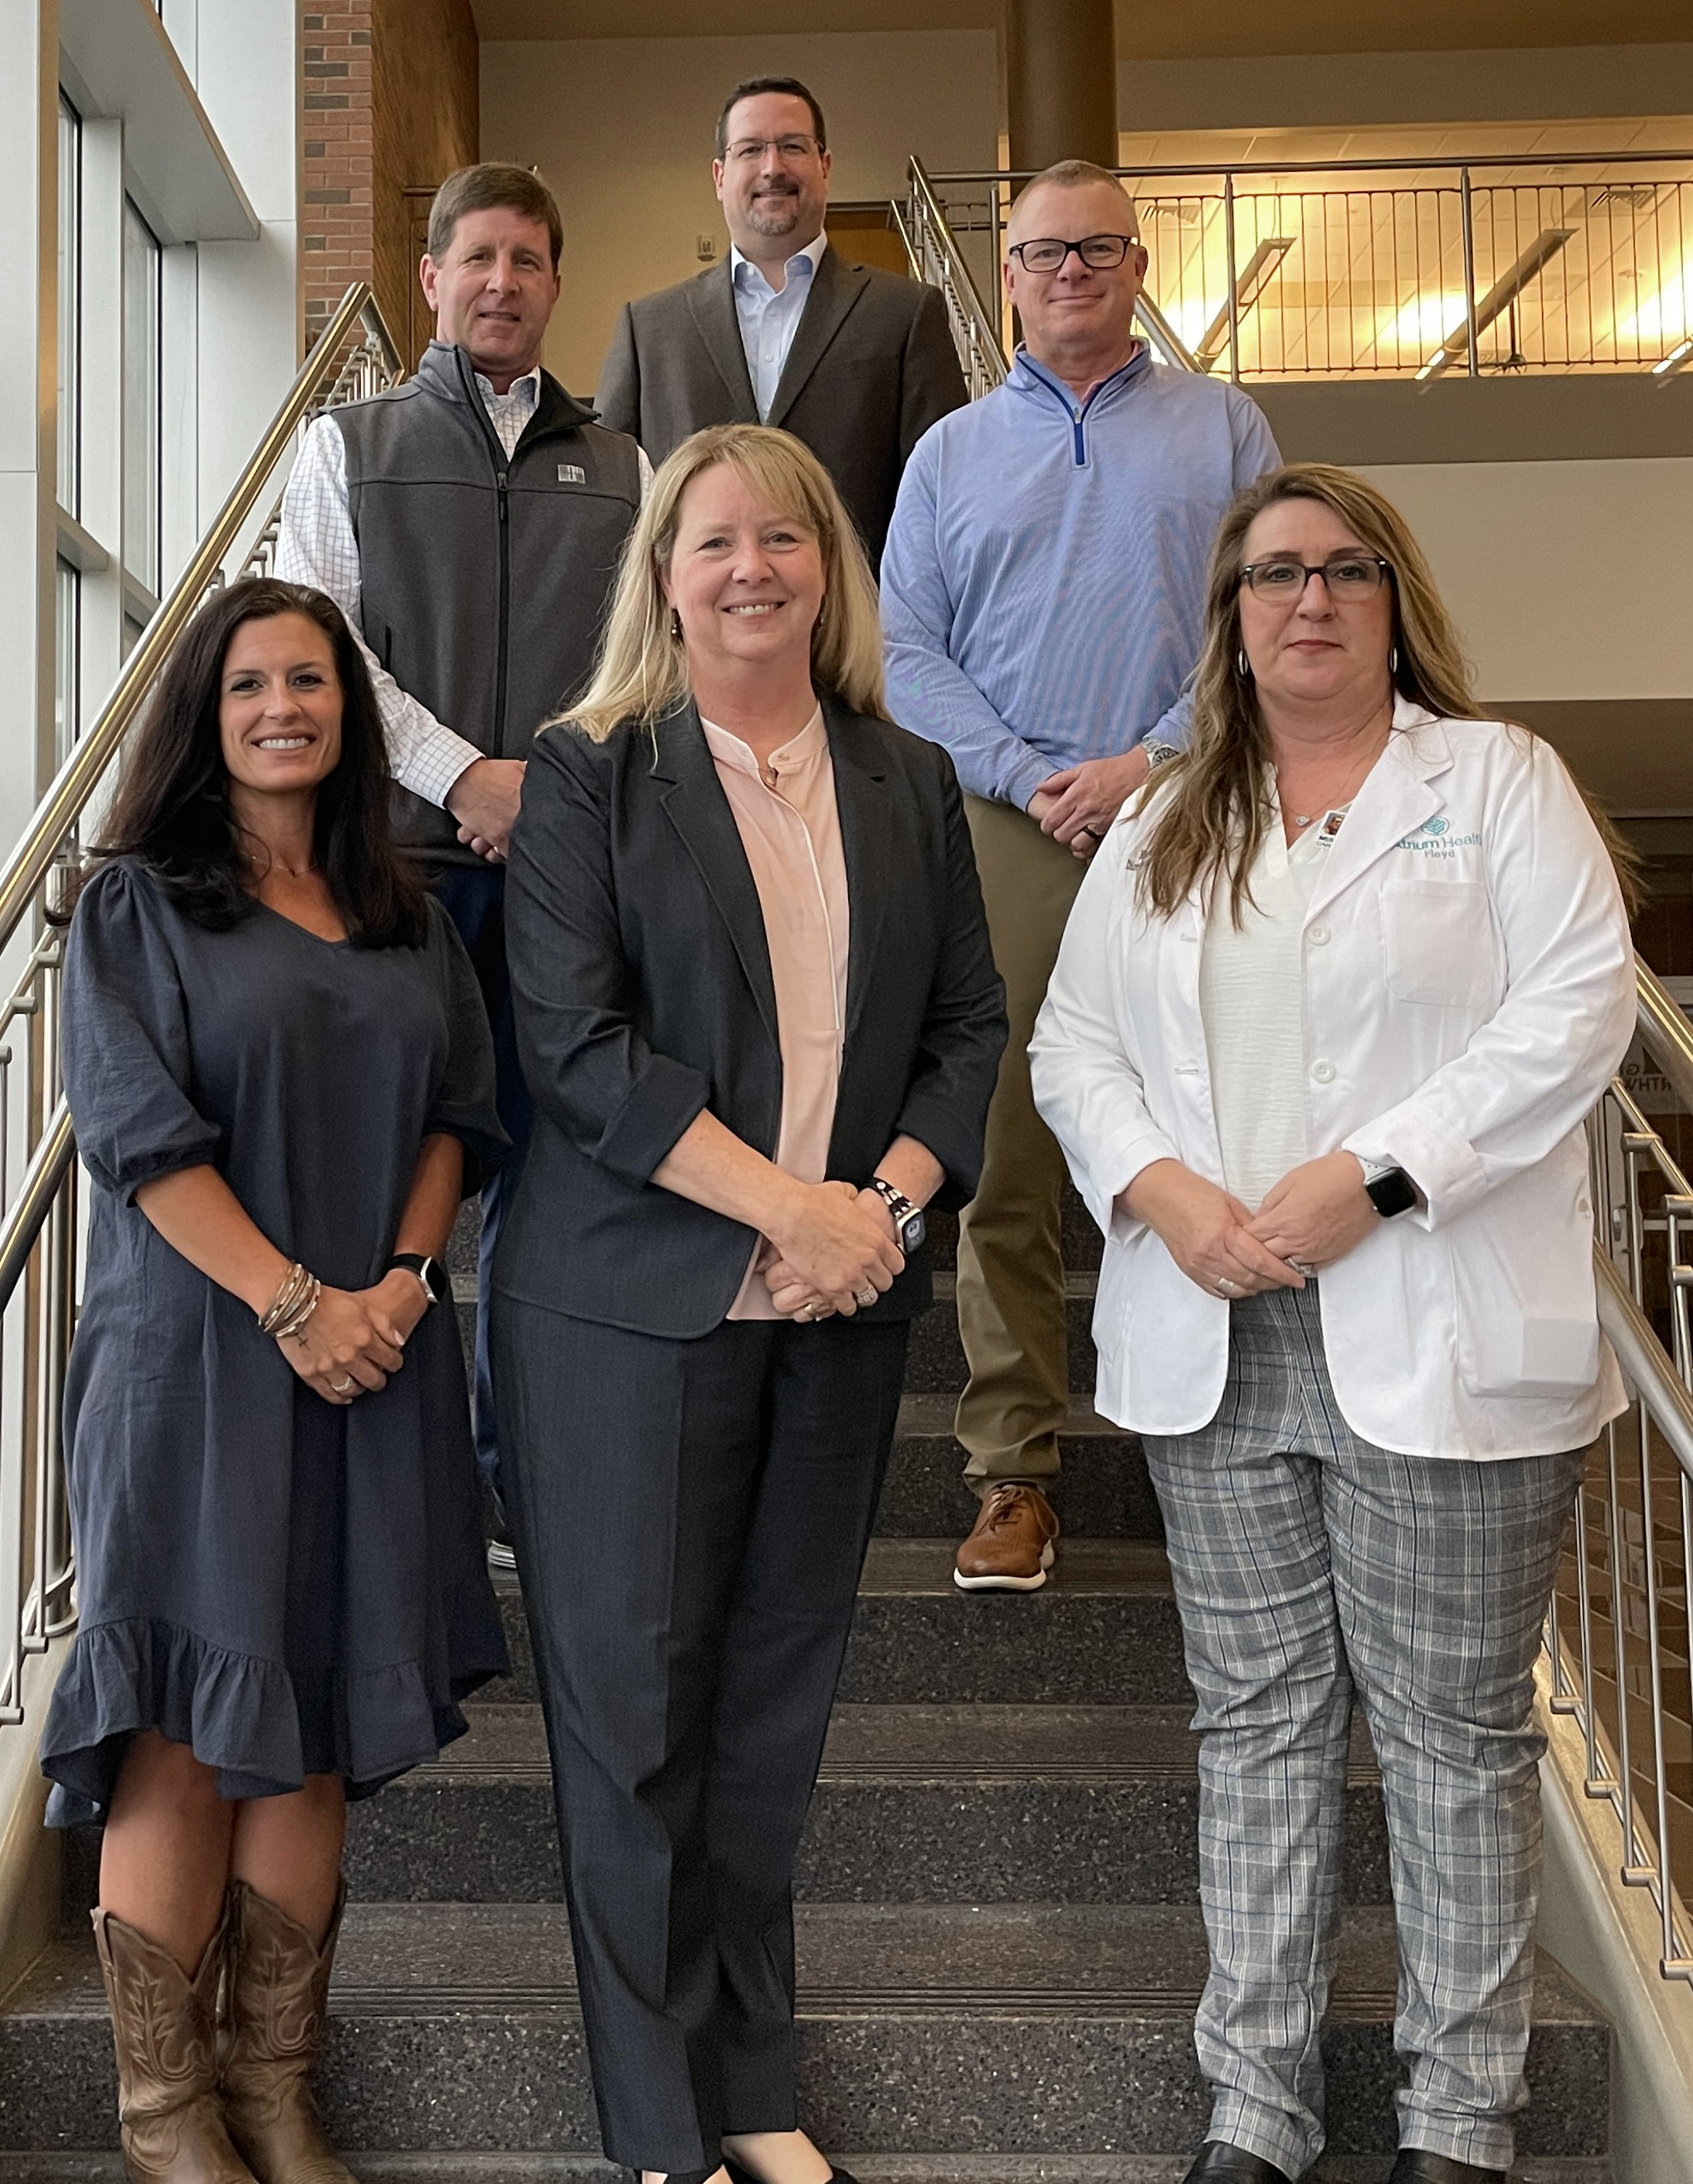 Dr. Heidi Popham, GNTC president (front row, center), welcomes new GNTC Board of Directors members (clockwise from bottom left) Megan Talley, Josh Ingle, Tyler Kendall, Jeff Petrea and Jessica “Missy” Puckett.